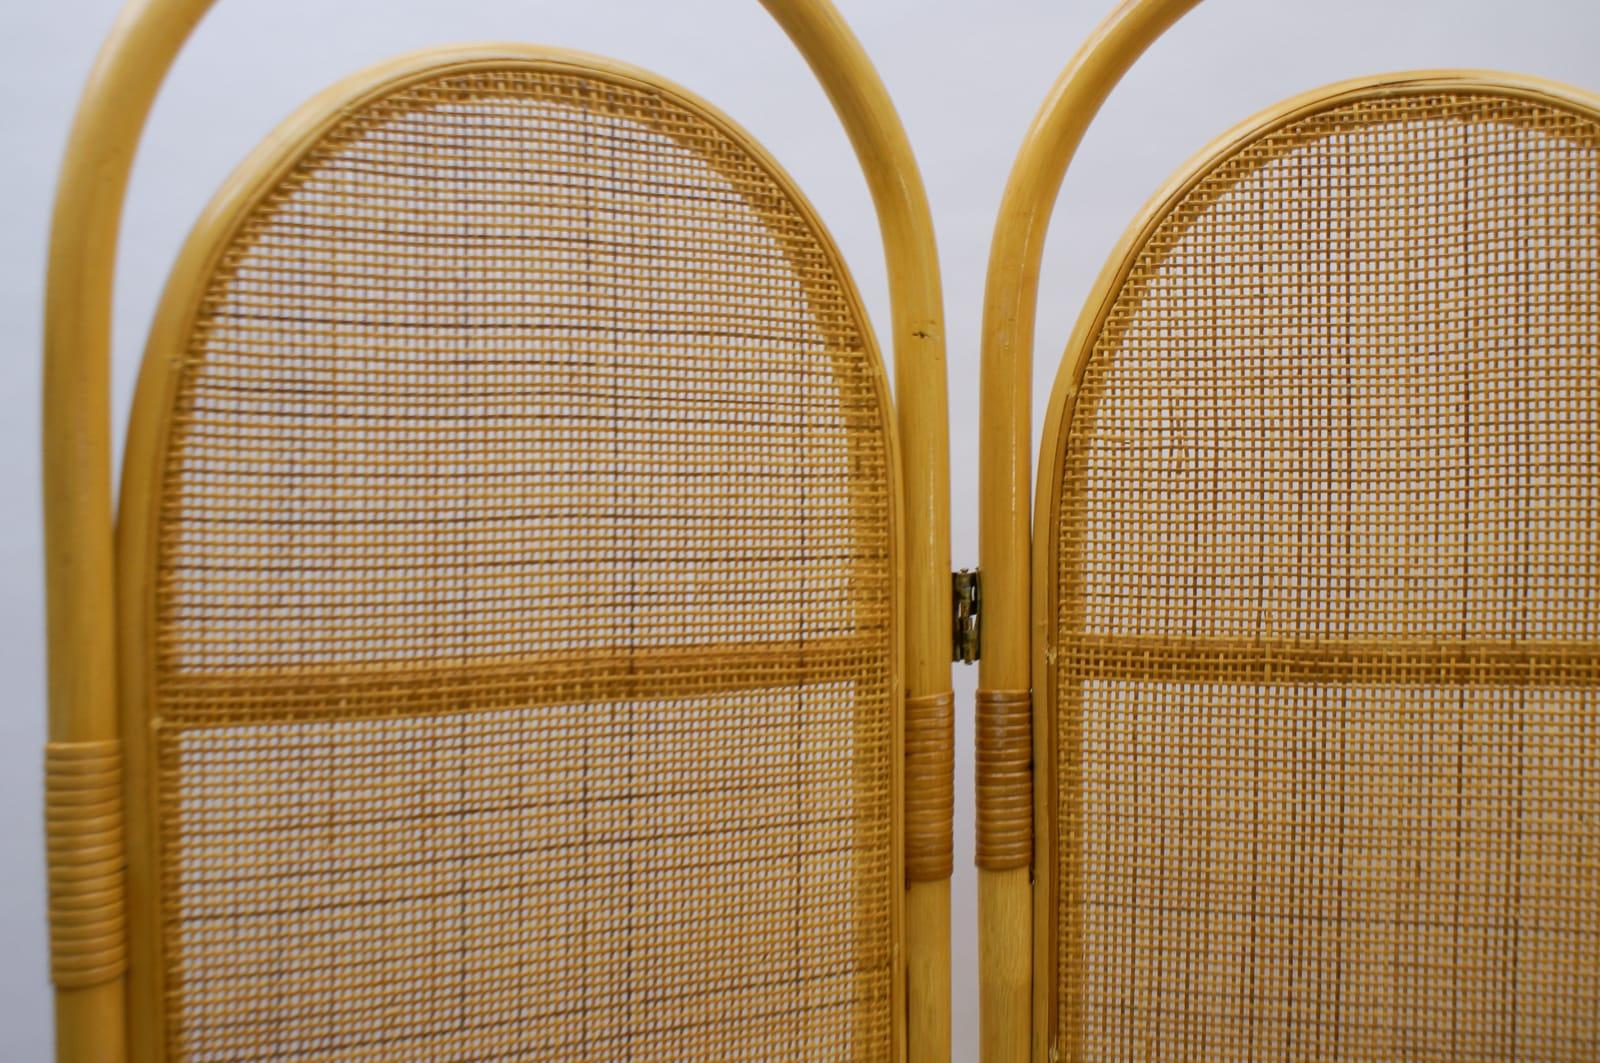 Mid-20th Century Sculptural Three-Panel Folding Screen Room Divider in Rattan and Wicker, 1960s For Sale